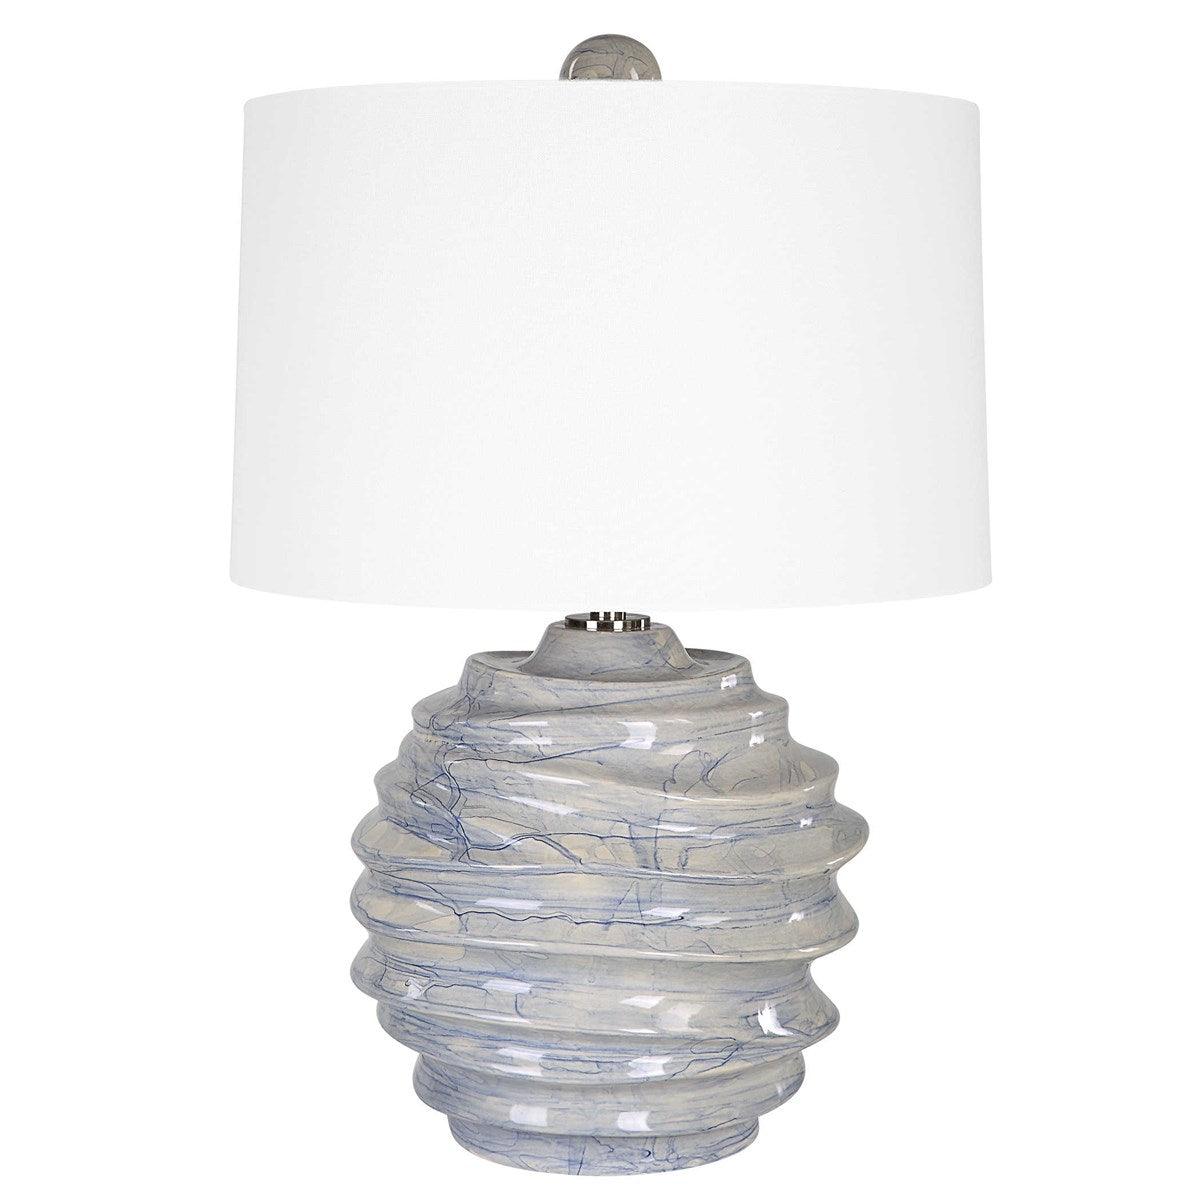 The Uttermost - Waves Accent Lamp - 30194-1 | Montreal Lighting & Hardware